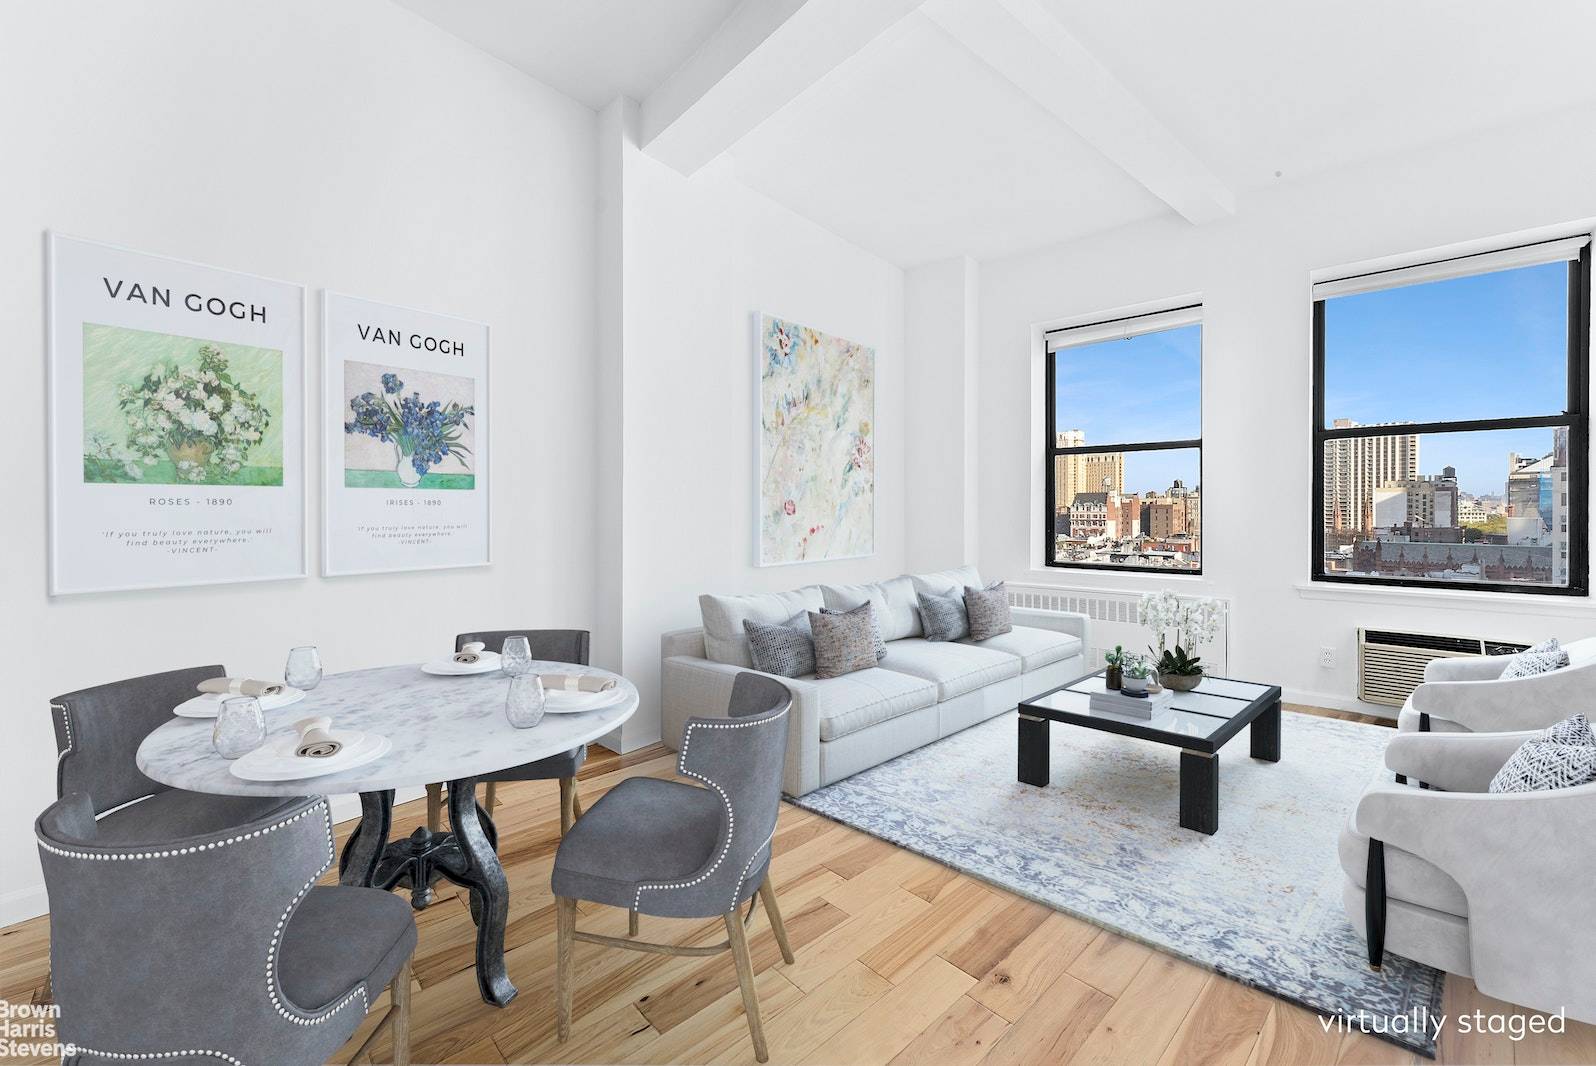 Expansive views of the City and Freedom Tower from every room along with dramatic 10 foot ceilings the perfect backdrop for a magnificent home.